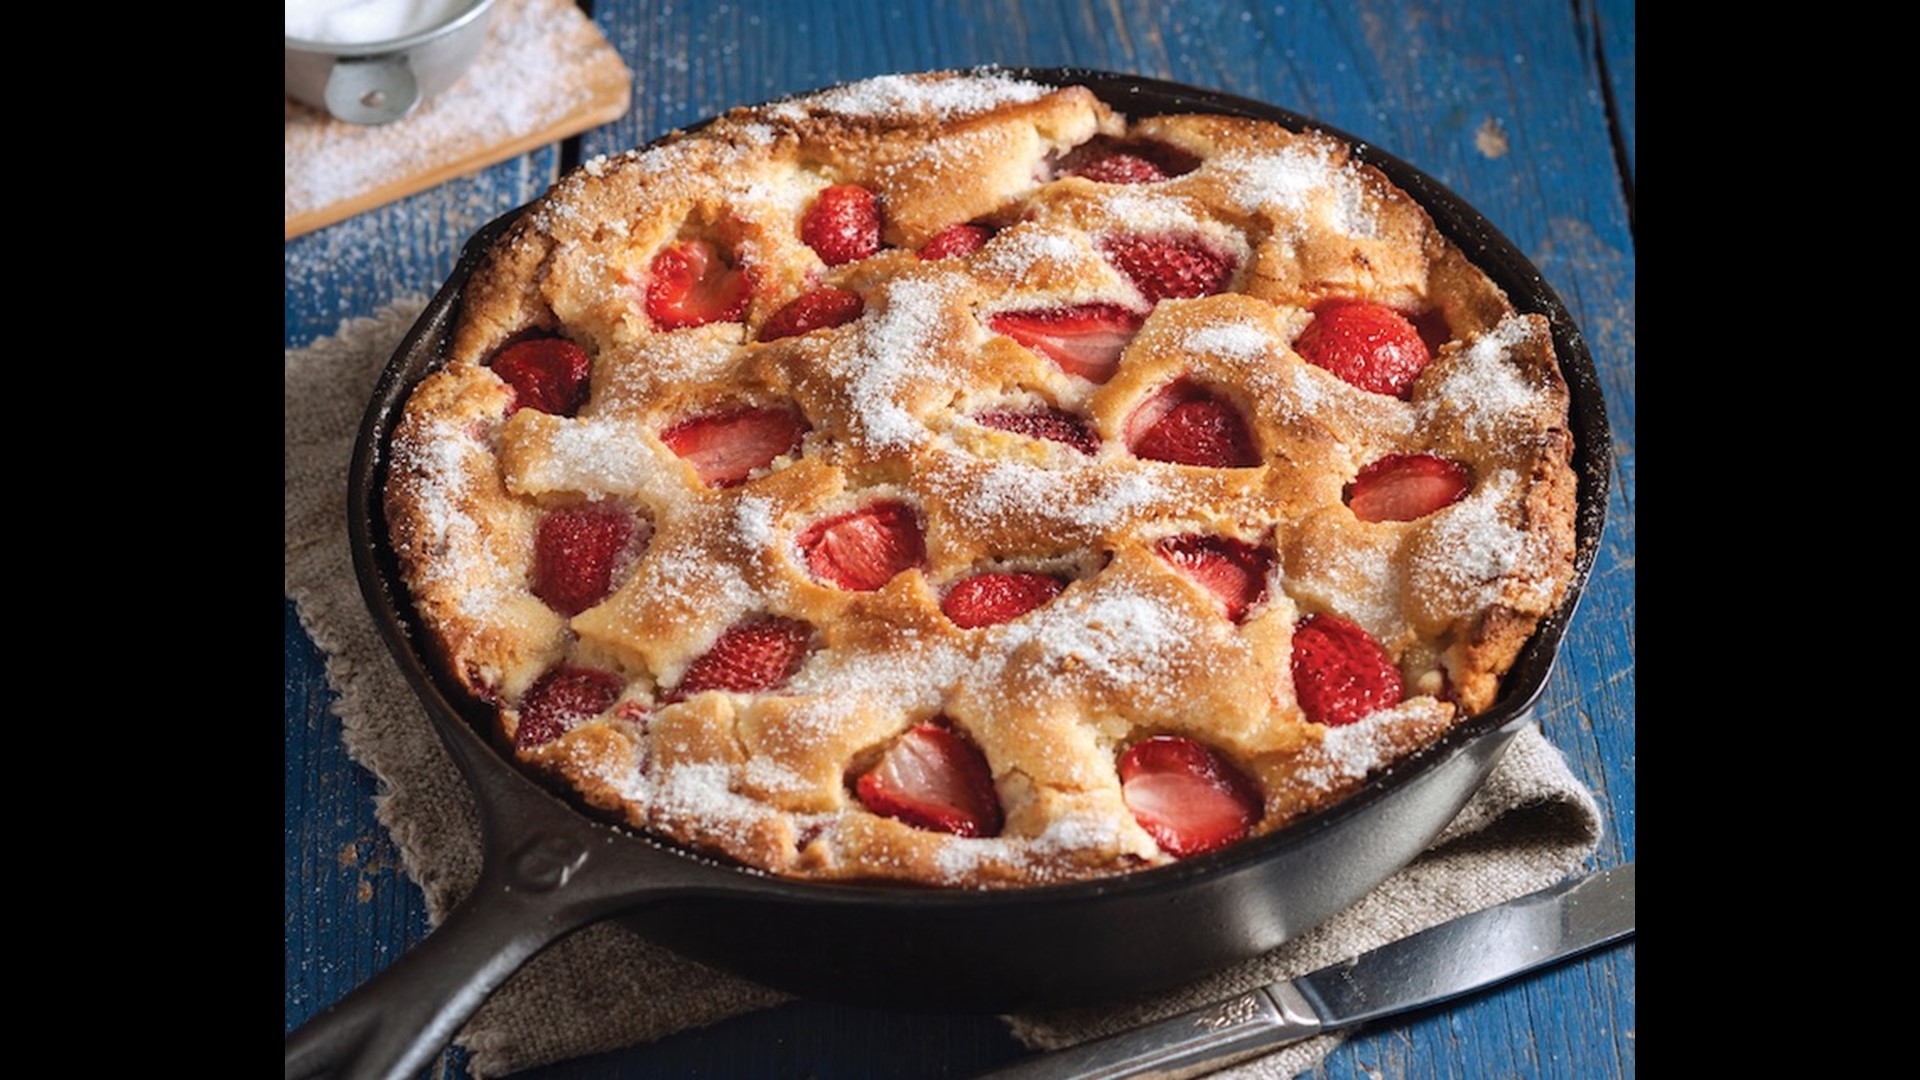 Make use of Arkansas’ abundant strawberry crop for this easy, yet delicious, strawberry skillet pound cake recipe from Debbie Arnold.